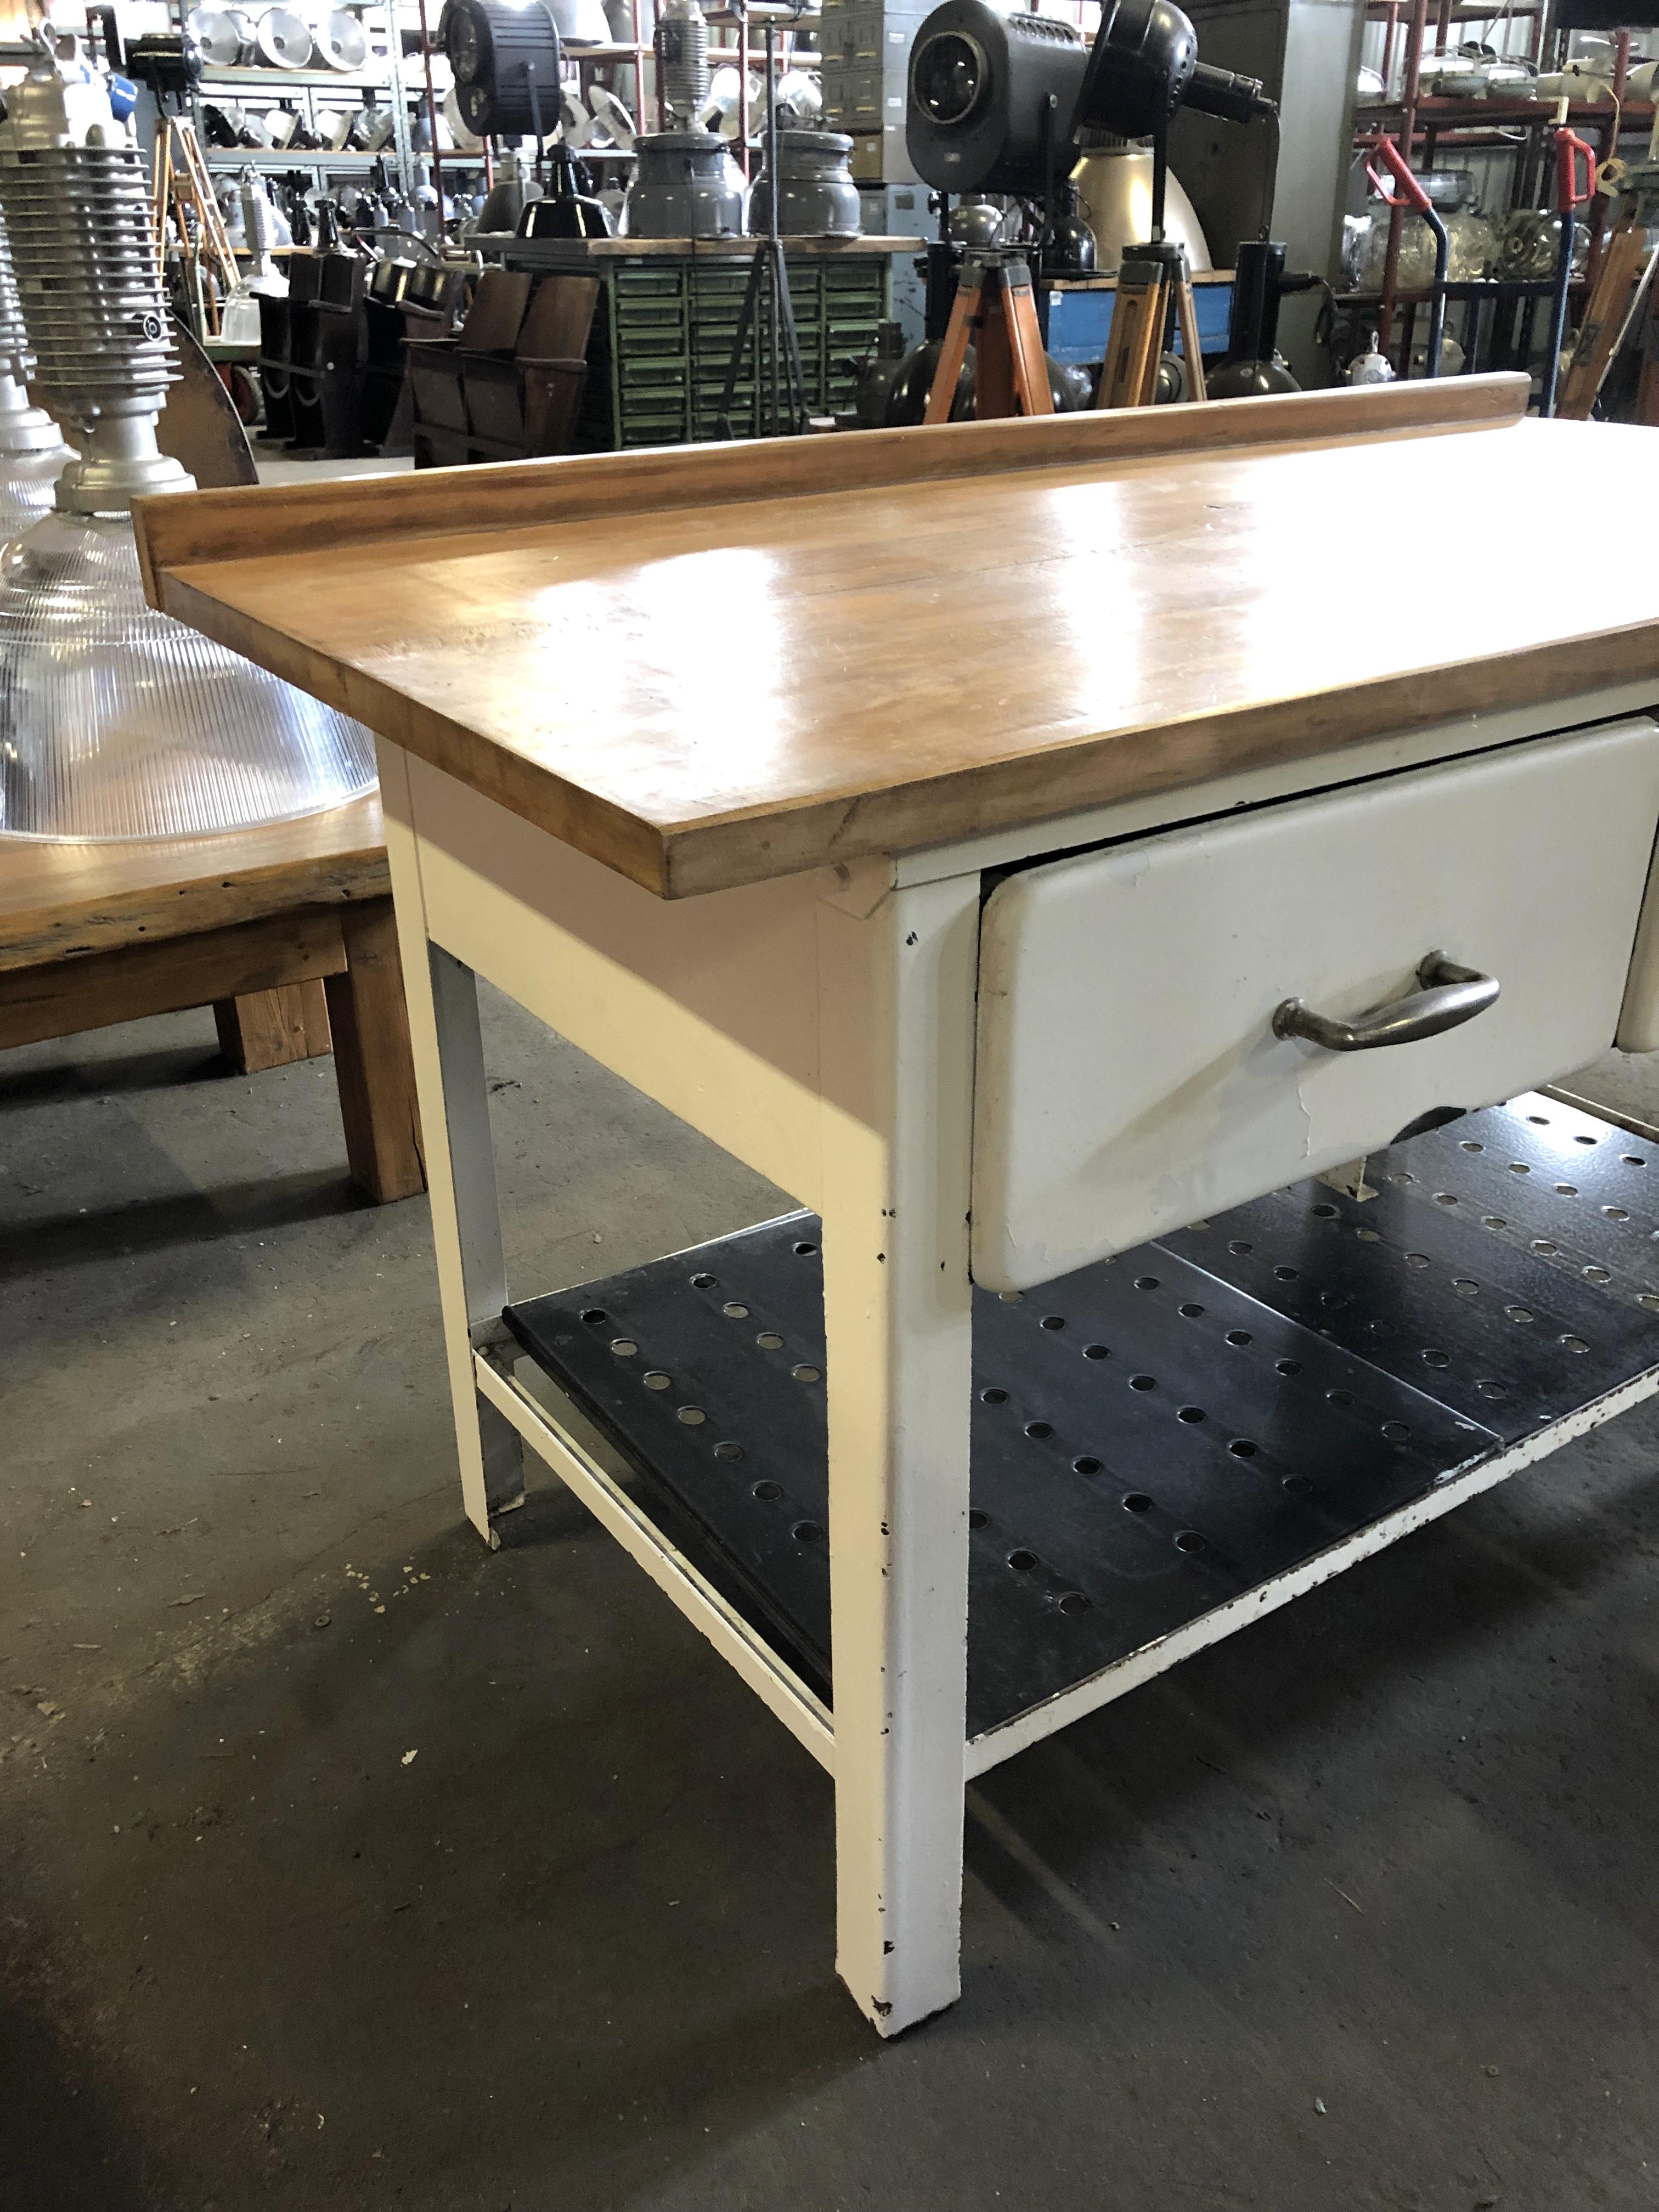 Vintage kitchen worktable. It features iron construction with two drawers and original wooden plate.
Drawer dimensions: 62 x 49 x 18 cm.